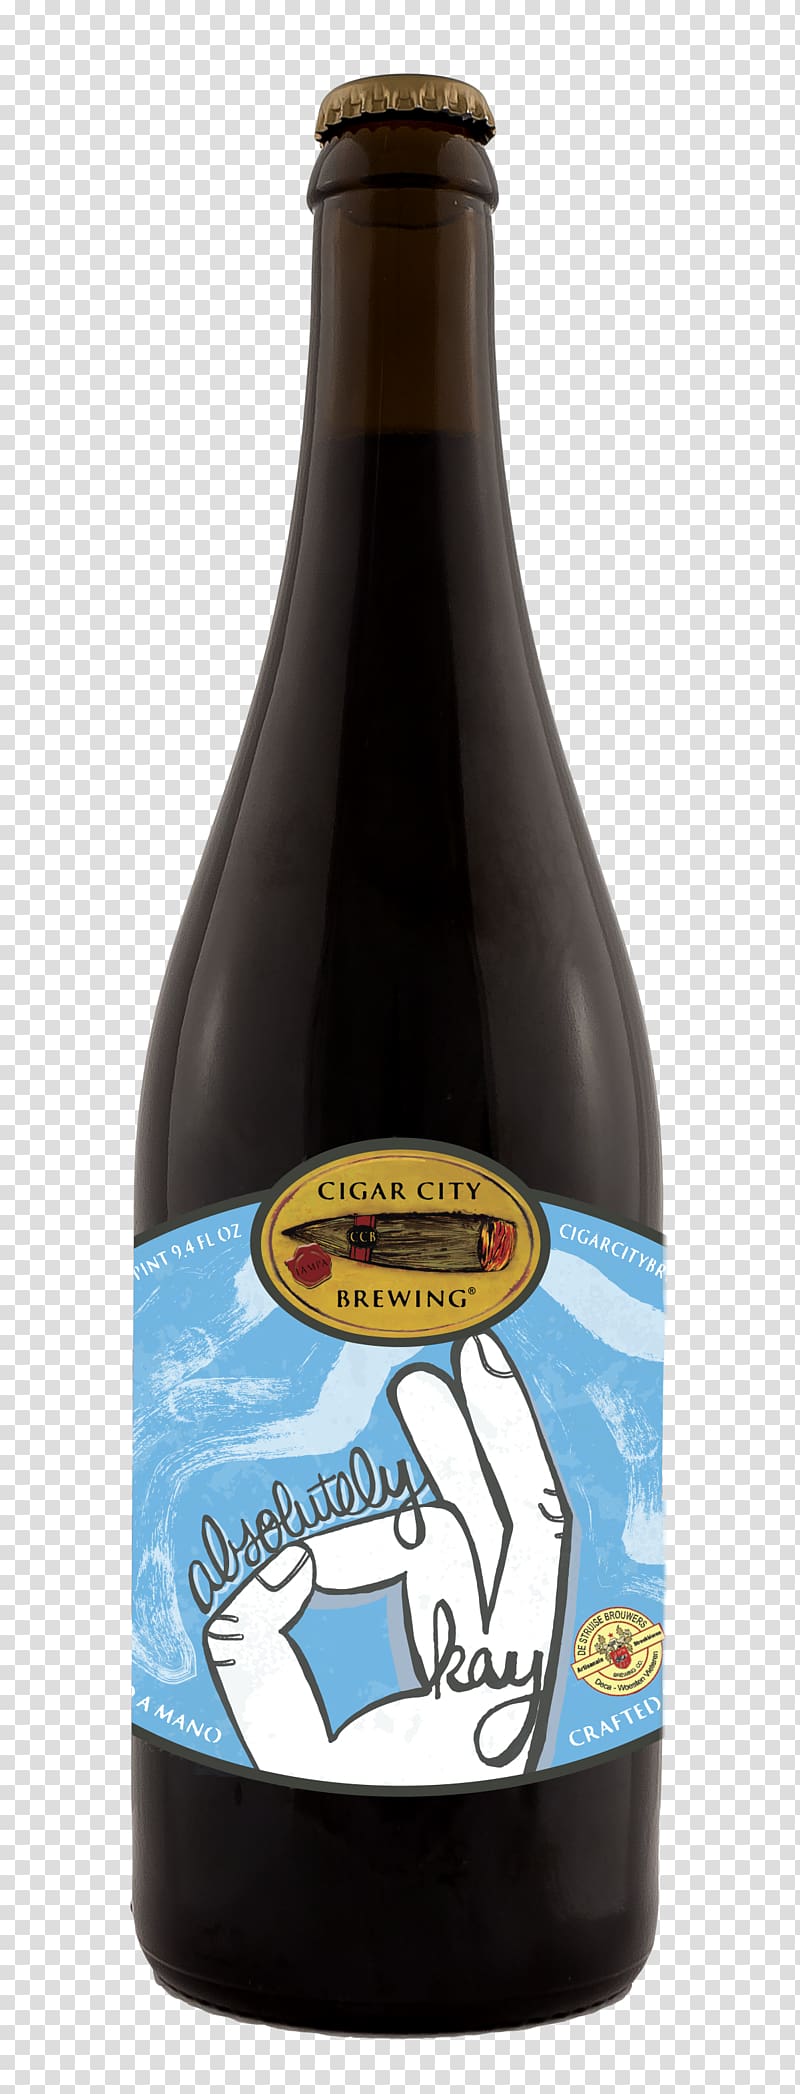 Beer bottle Russian Imperial Stout Cream ale, beer transparent background PNG clipart